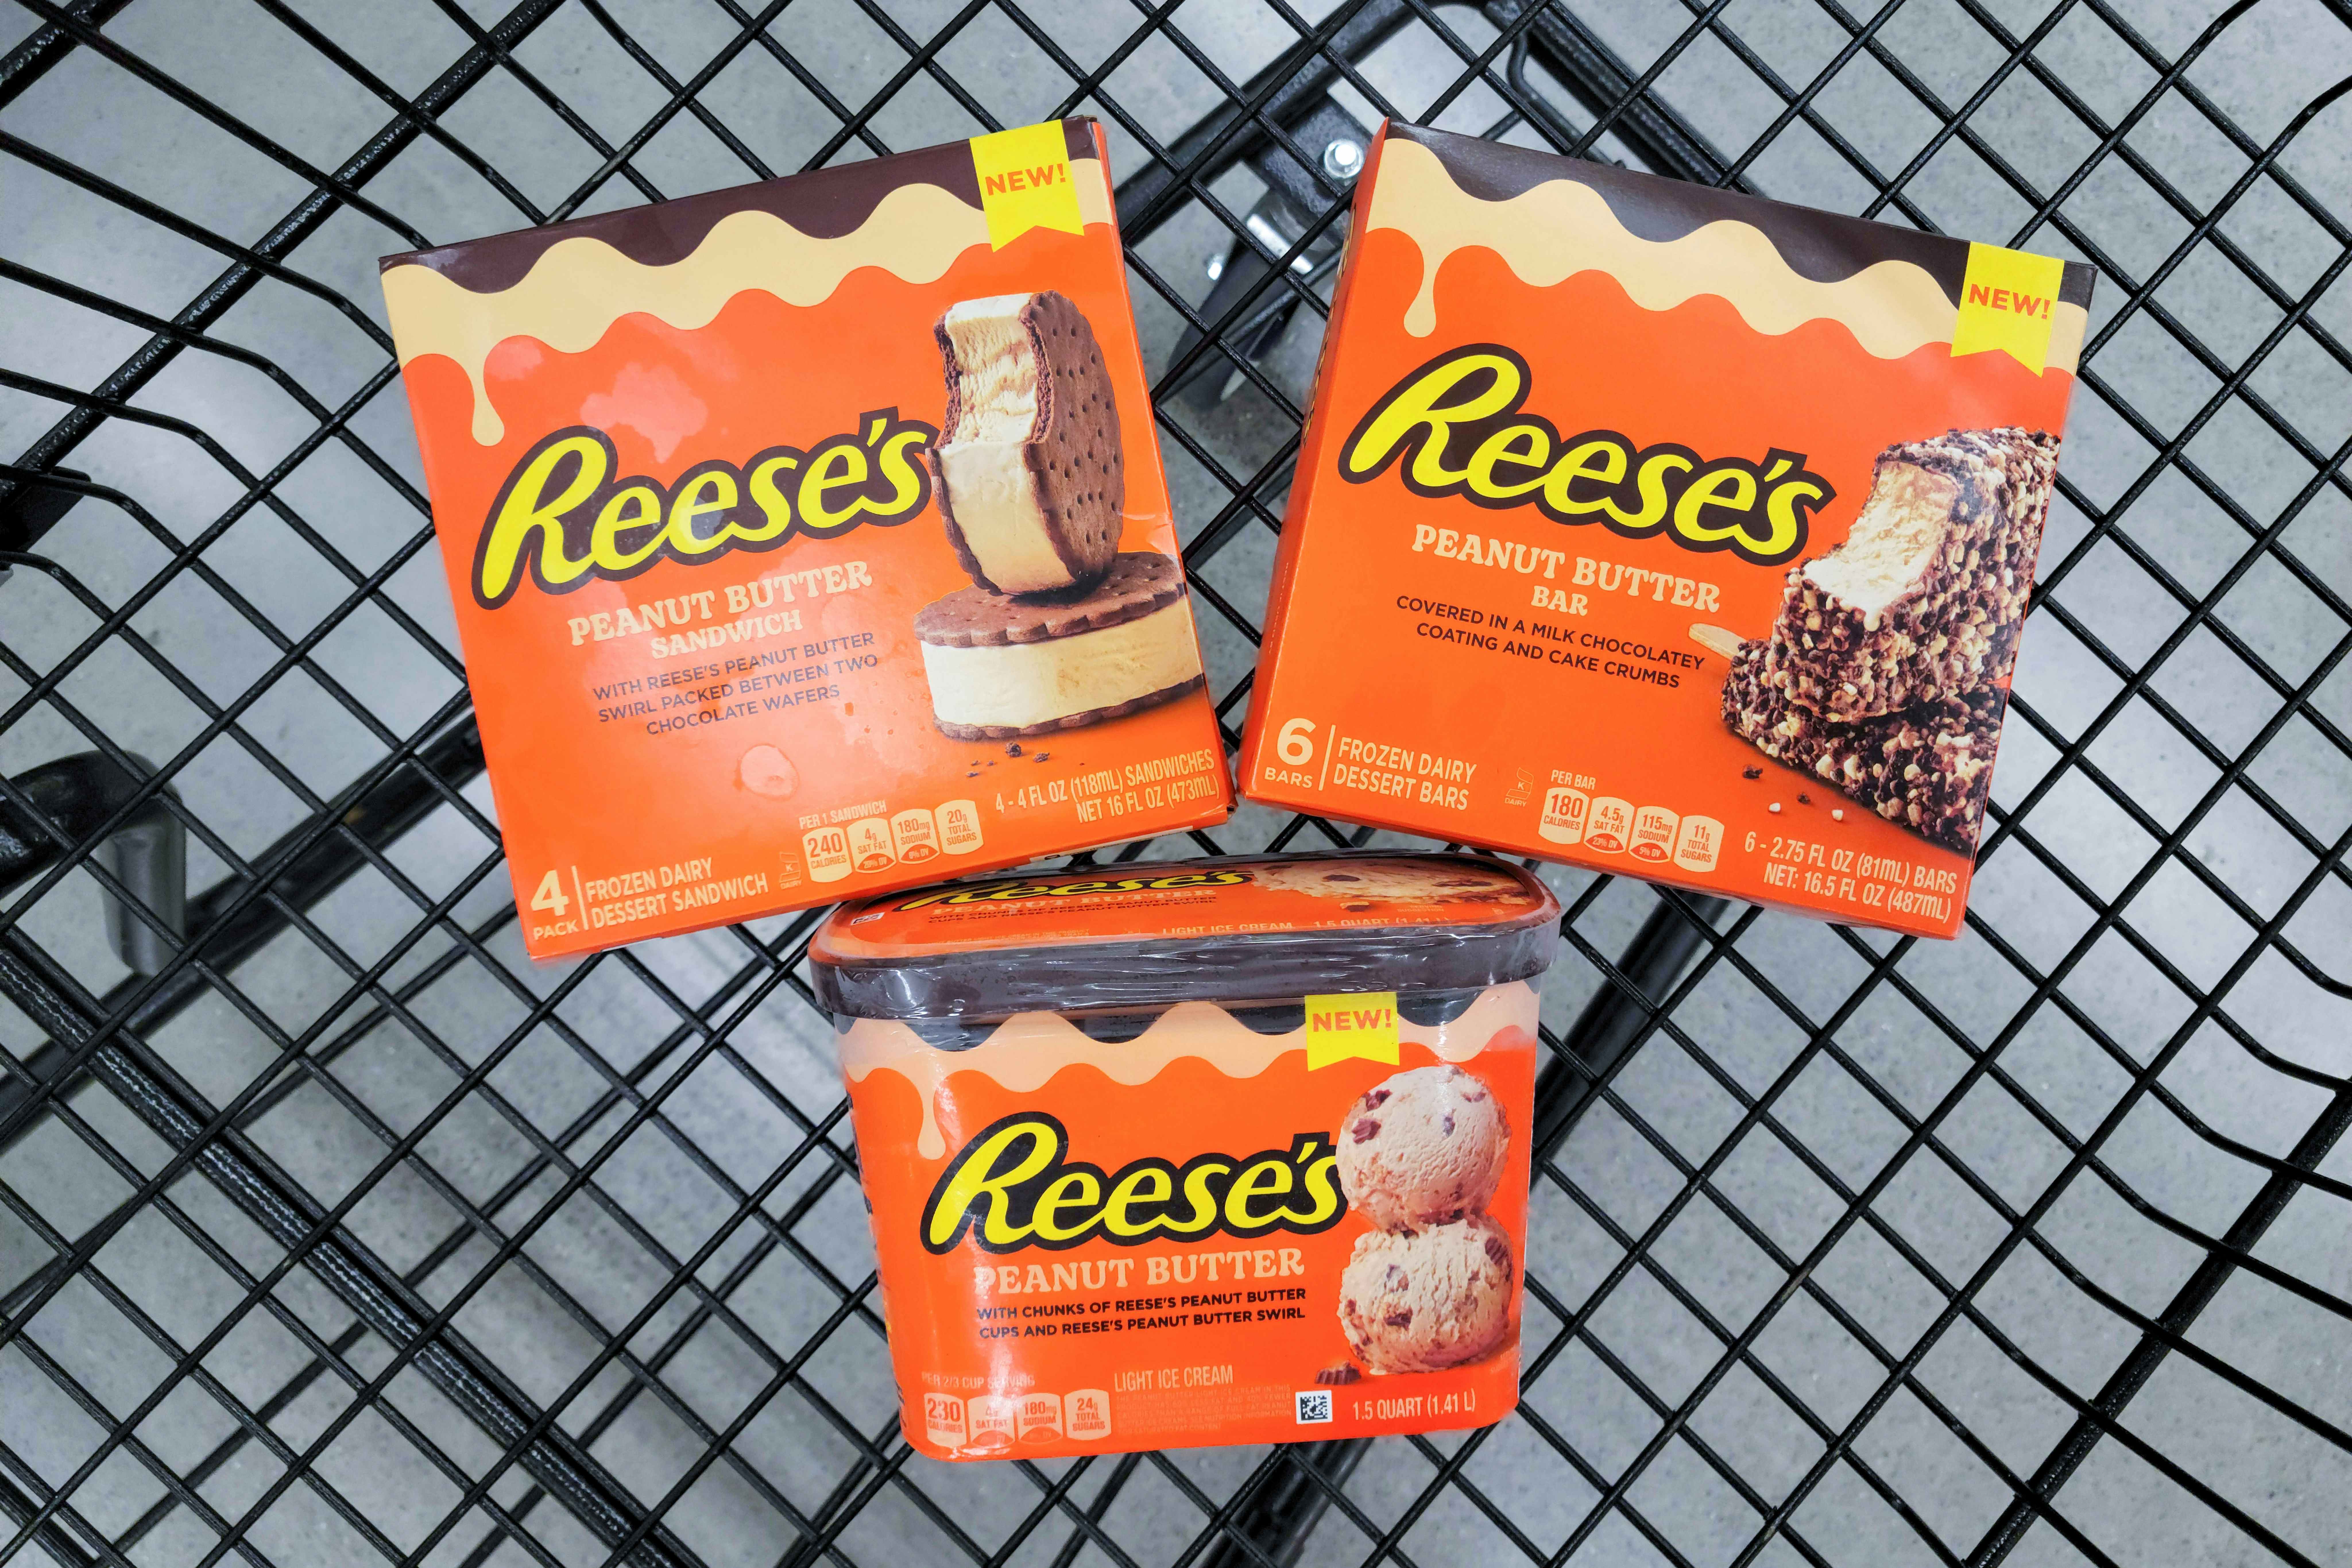 Stock Up on Reese's Frozen Desserts at Select Grocery Stores